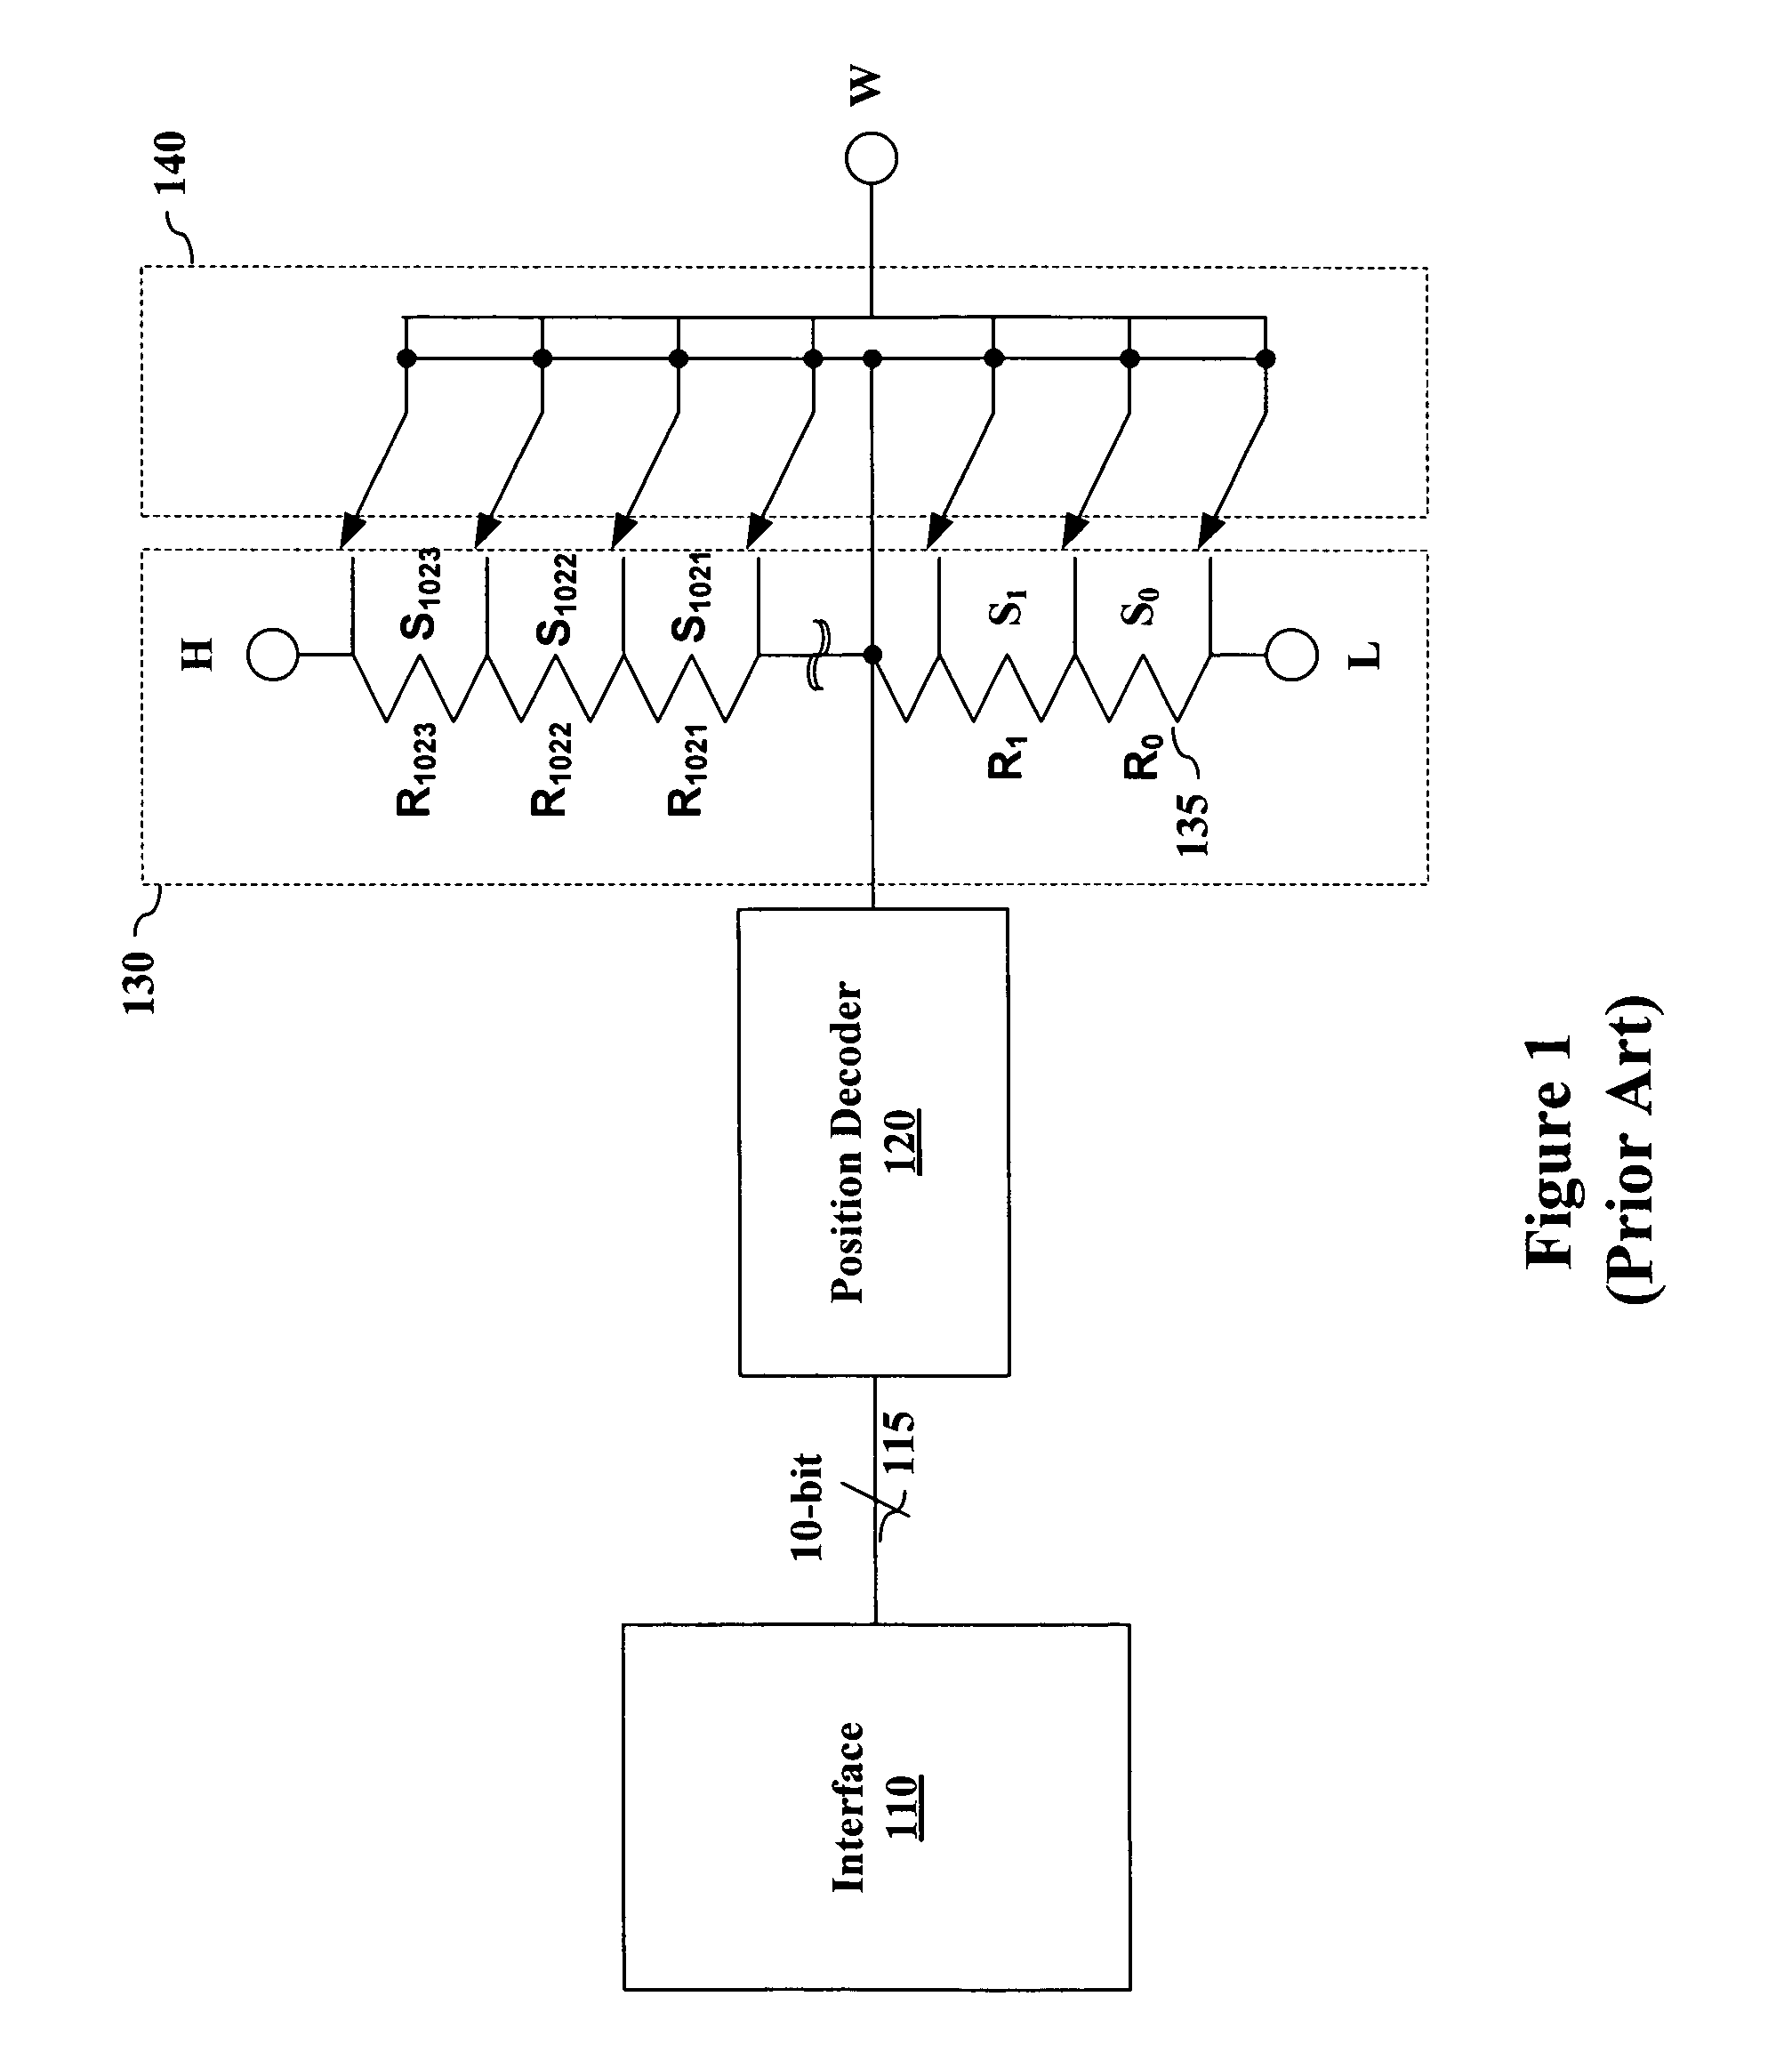 Area-efficient, digital variable resistor with high resolution